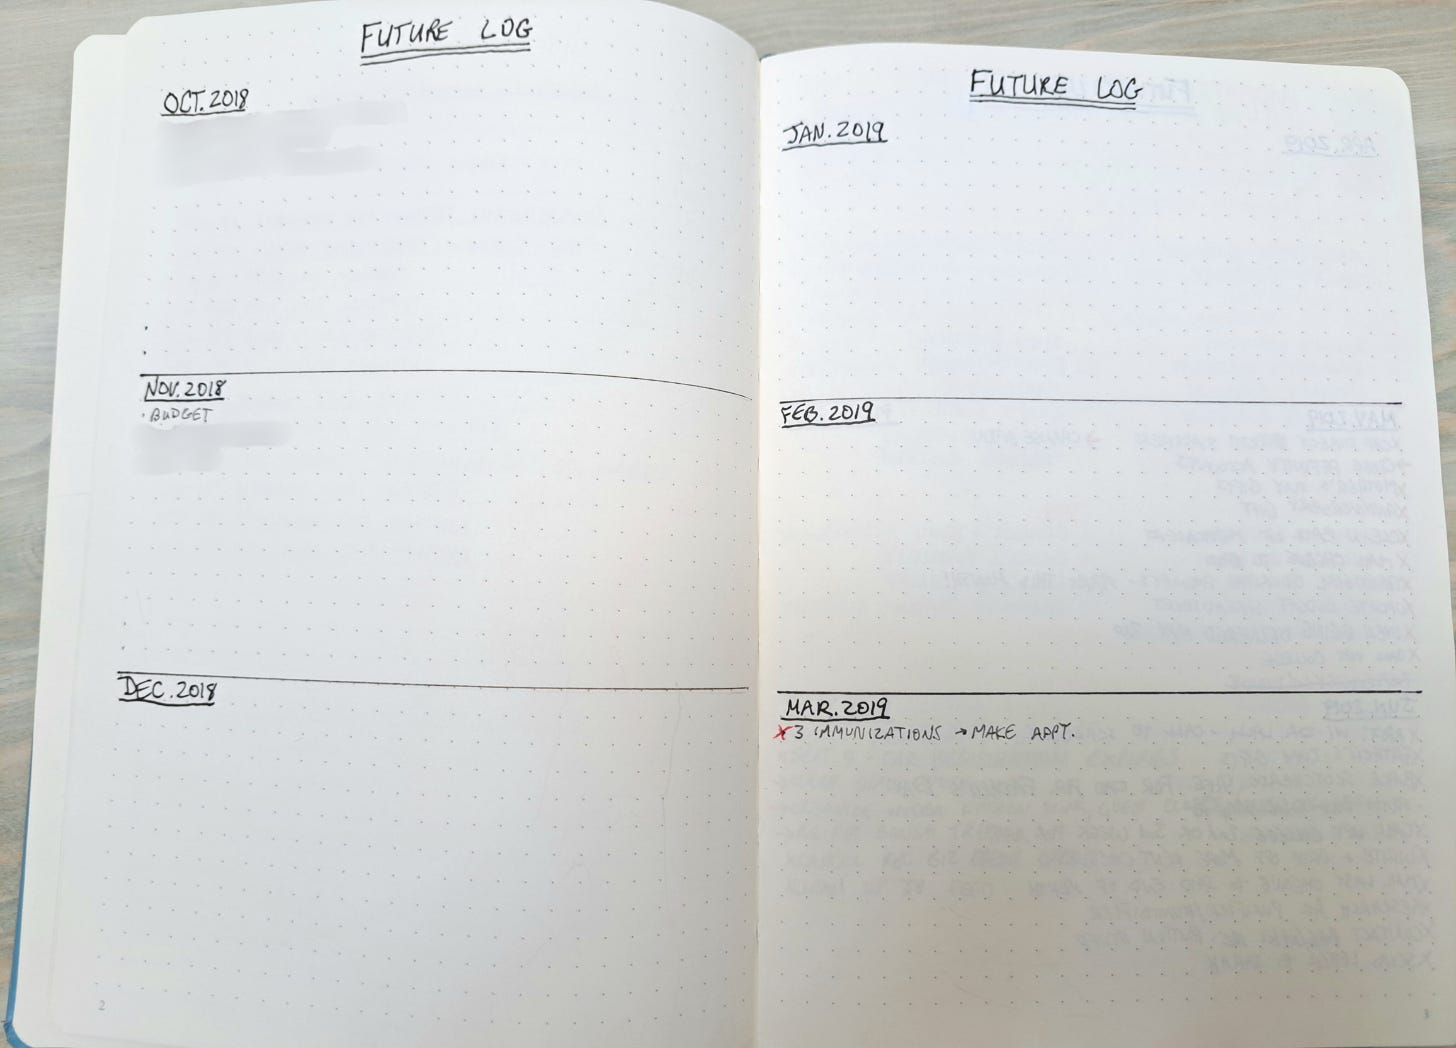 Image of a future log in my notebook. Each page is divided into 3 sections with the name of the month above each section.